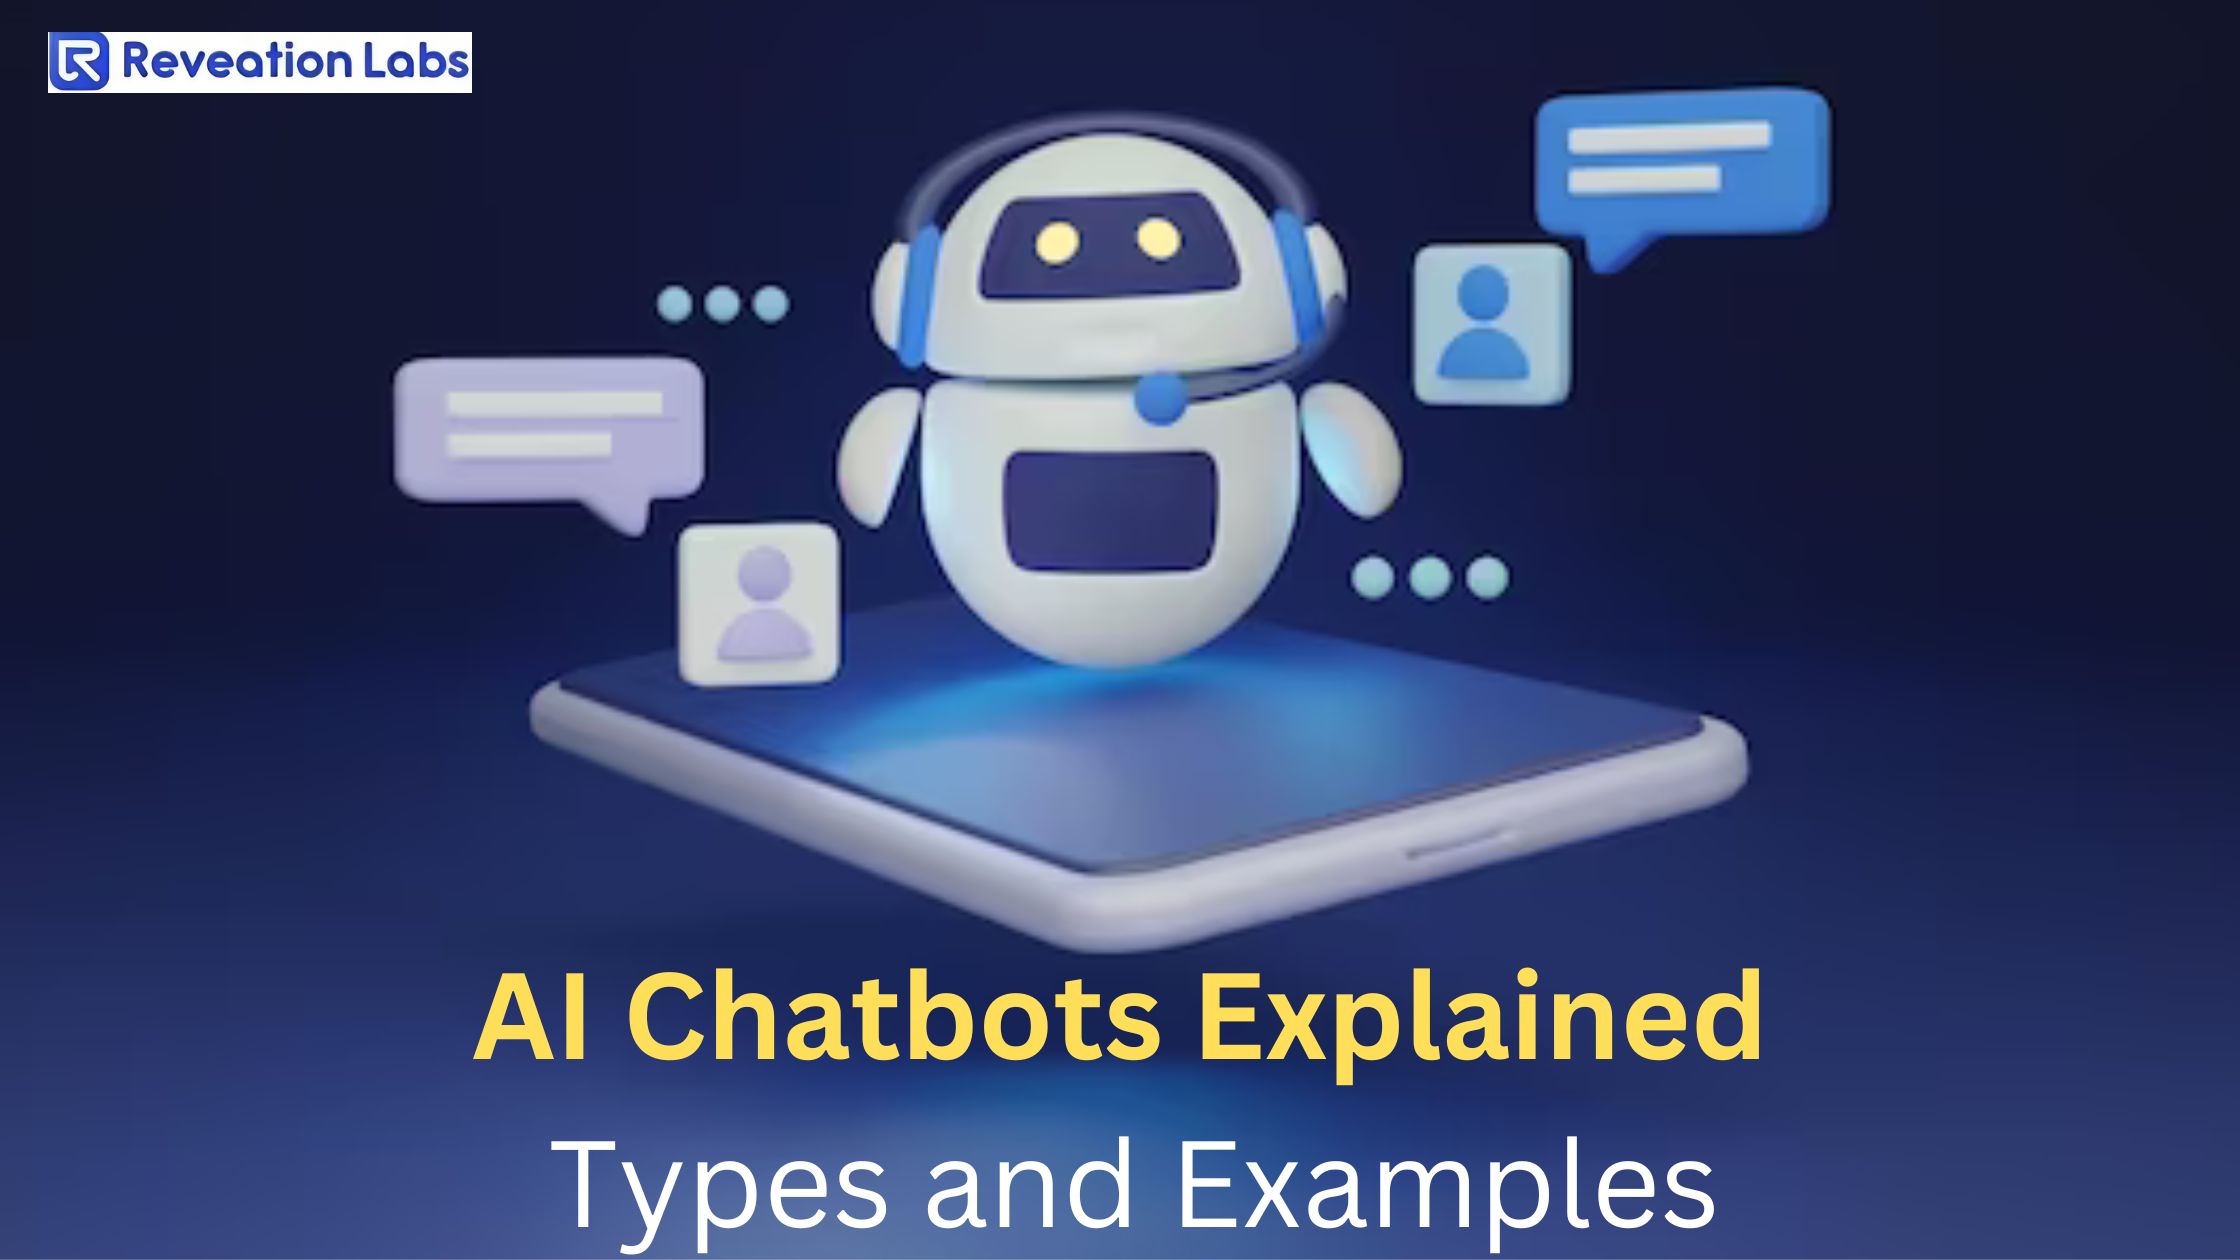 AI Chatbots Explained: Types and Examples